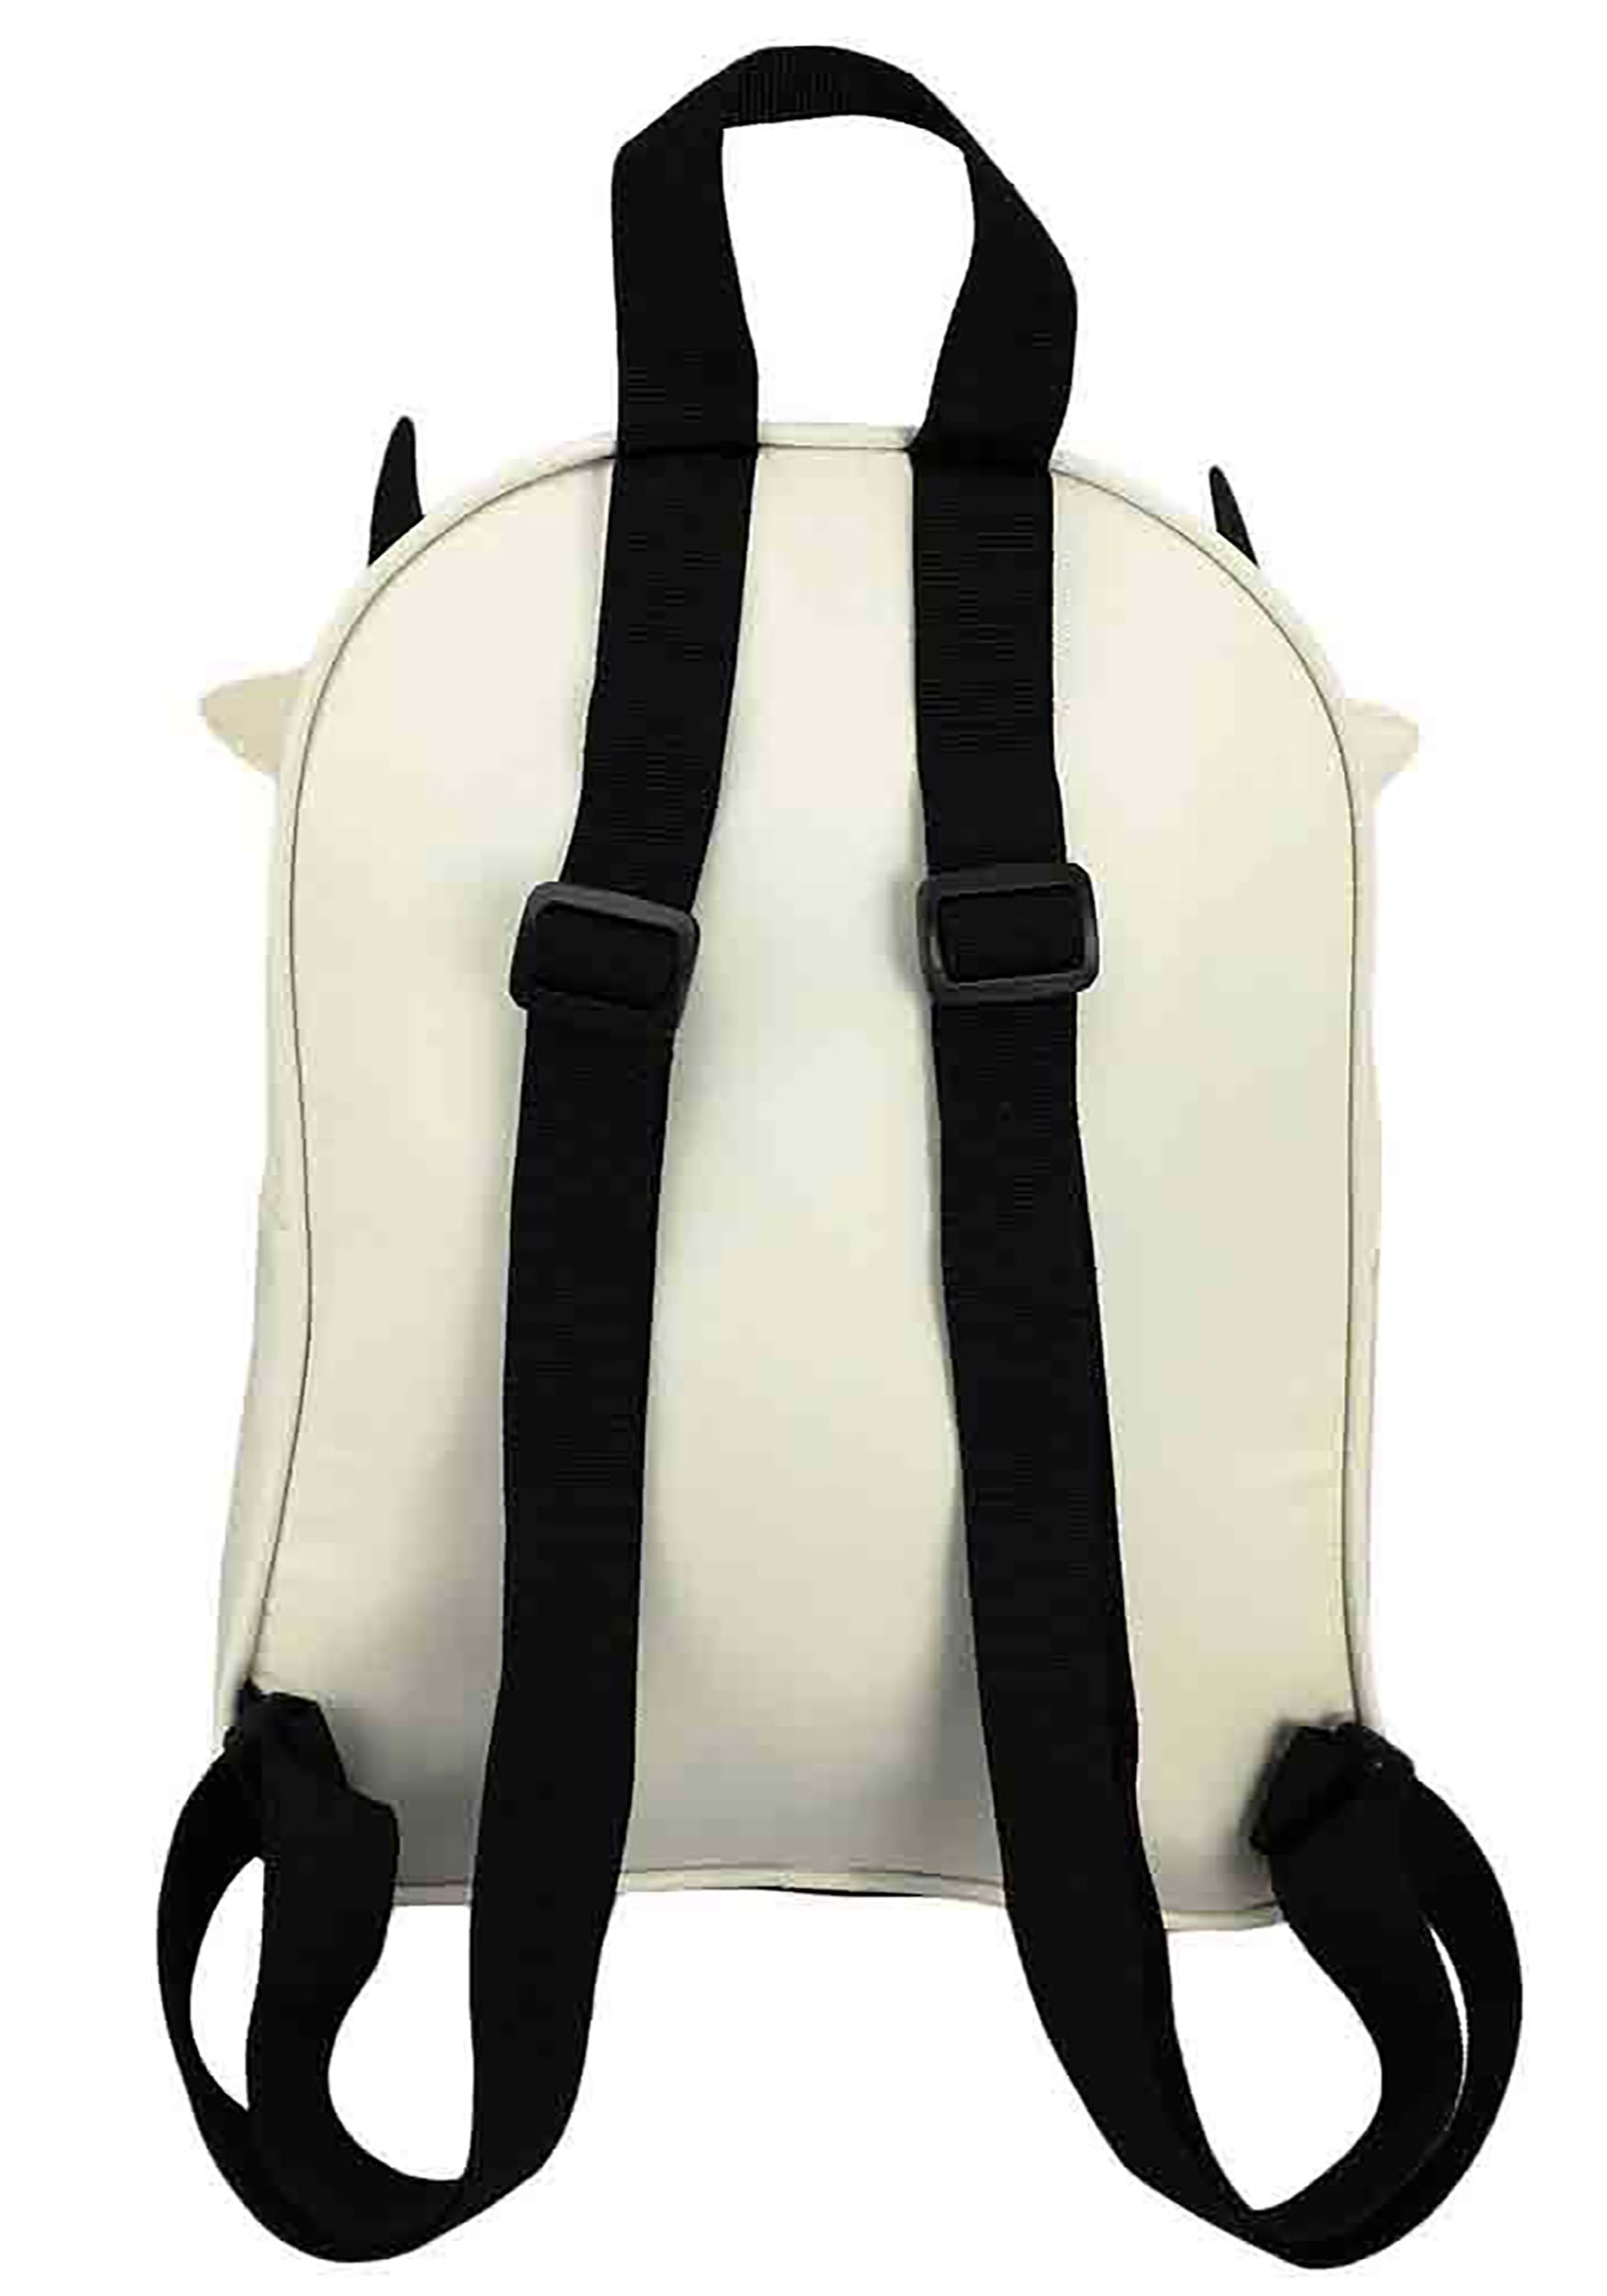 Decorative 3D Mini Backpack From Avatar Last Airbender Of Appa